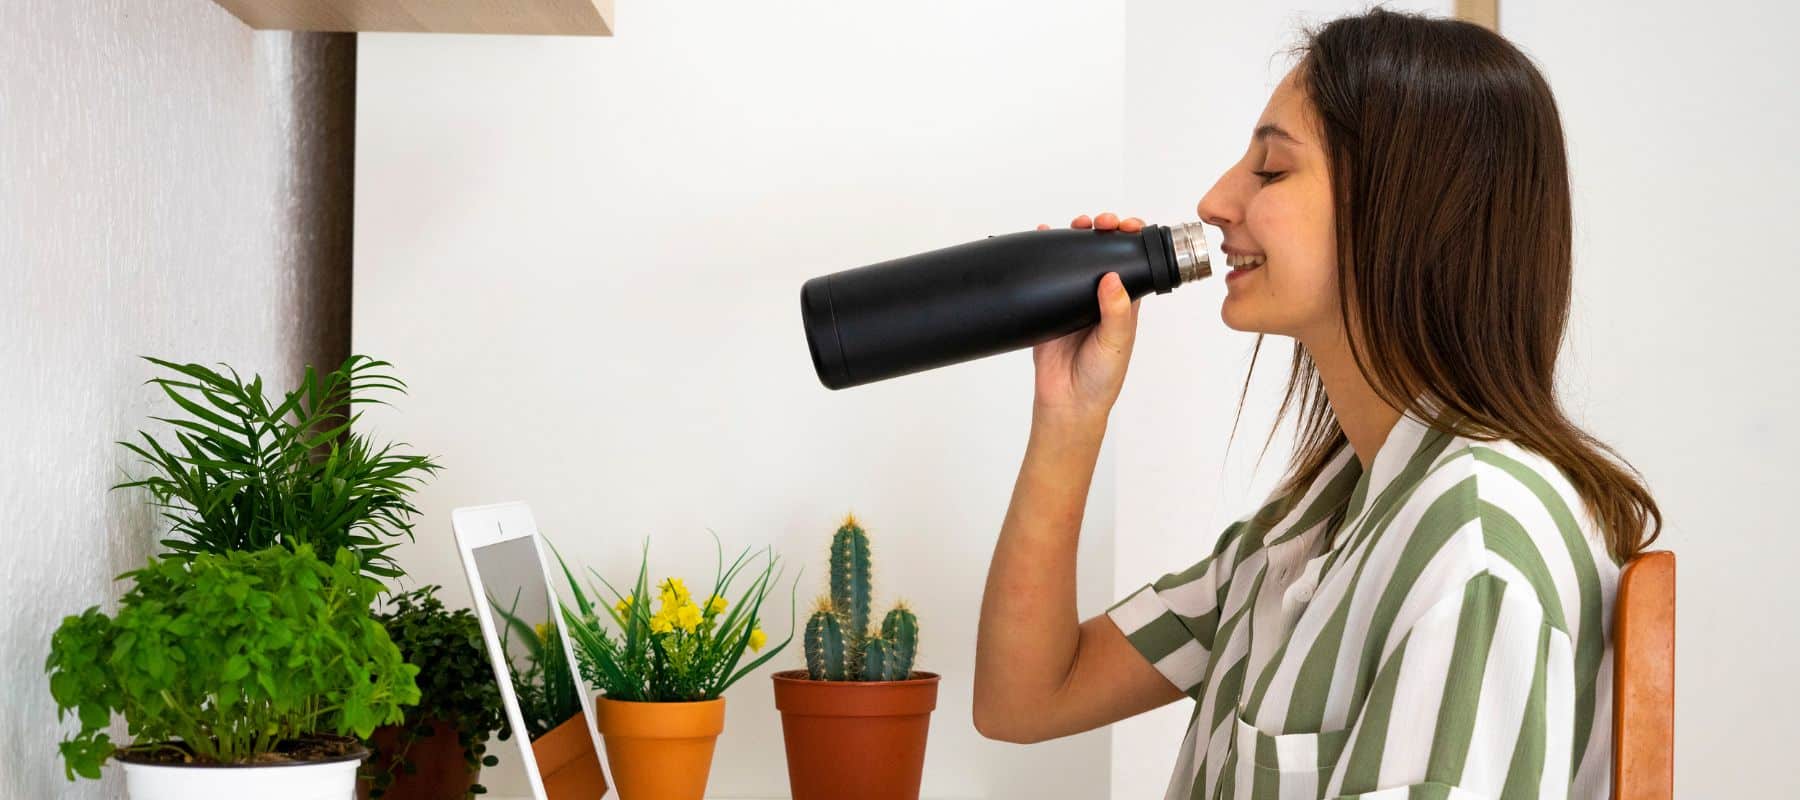 Woman drinking water out of a stainless steel mug